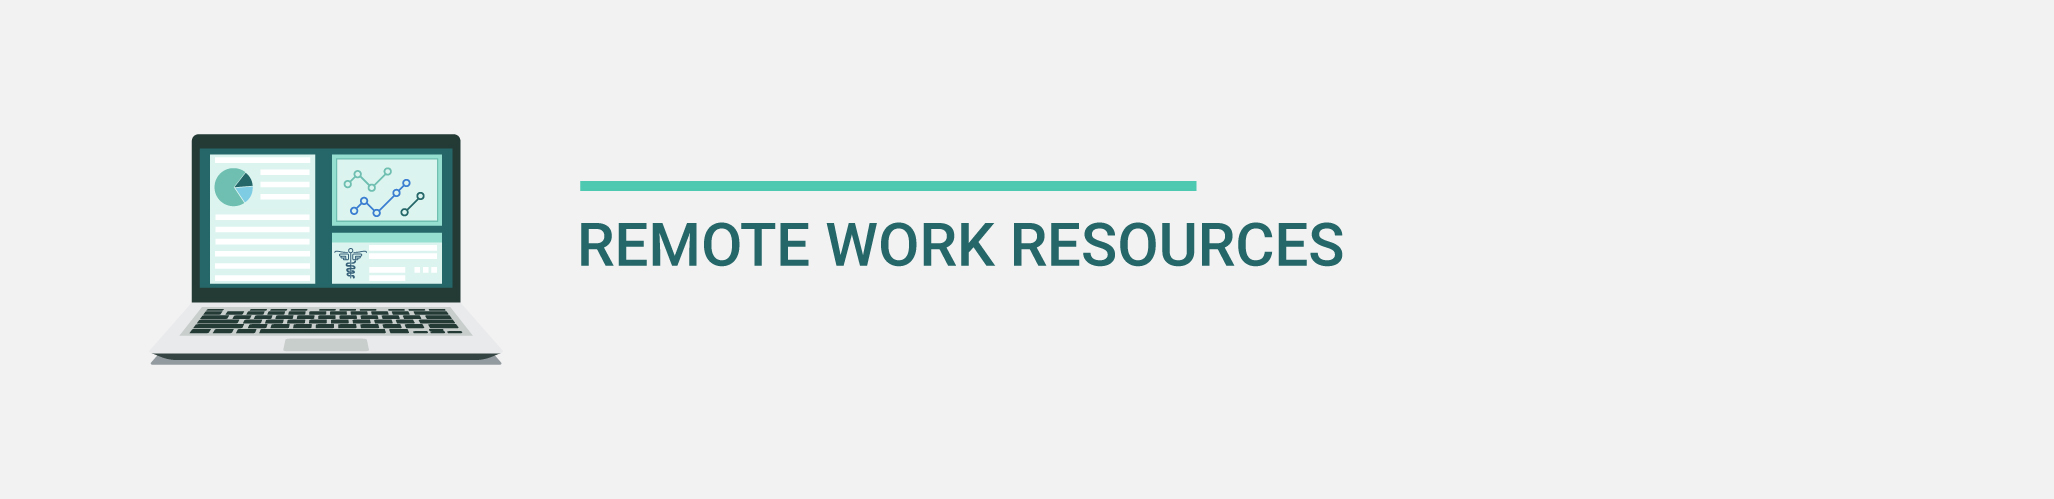 Icon of a laptop with text "Remote Work Resources"